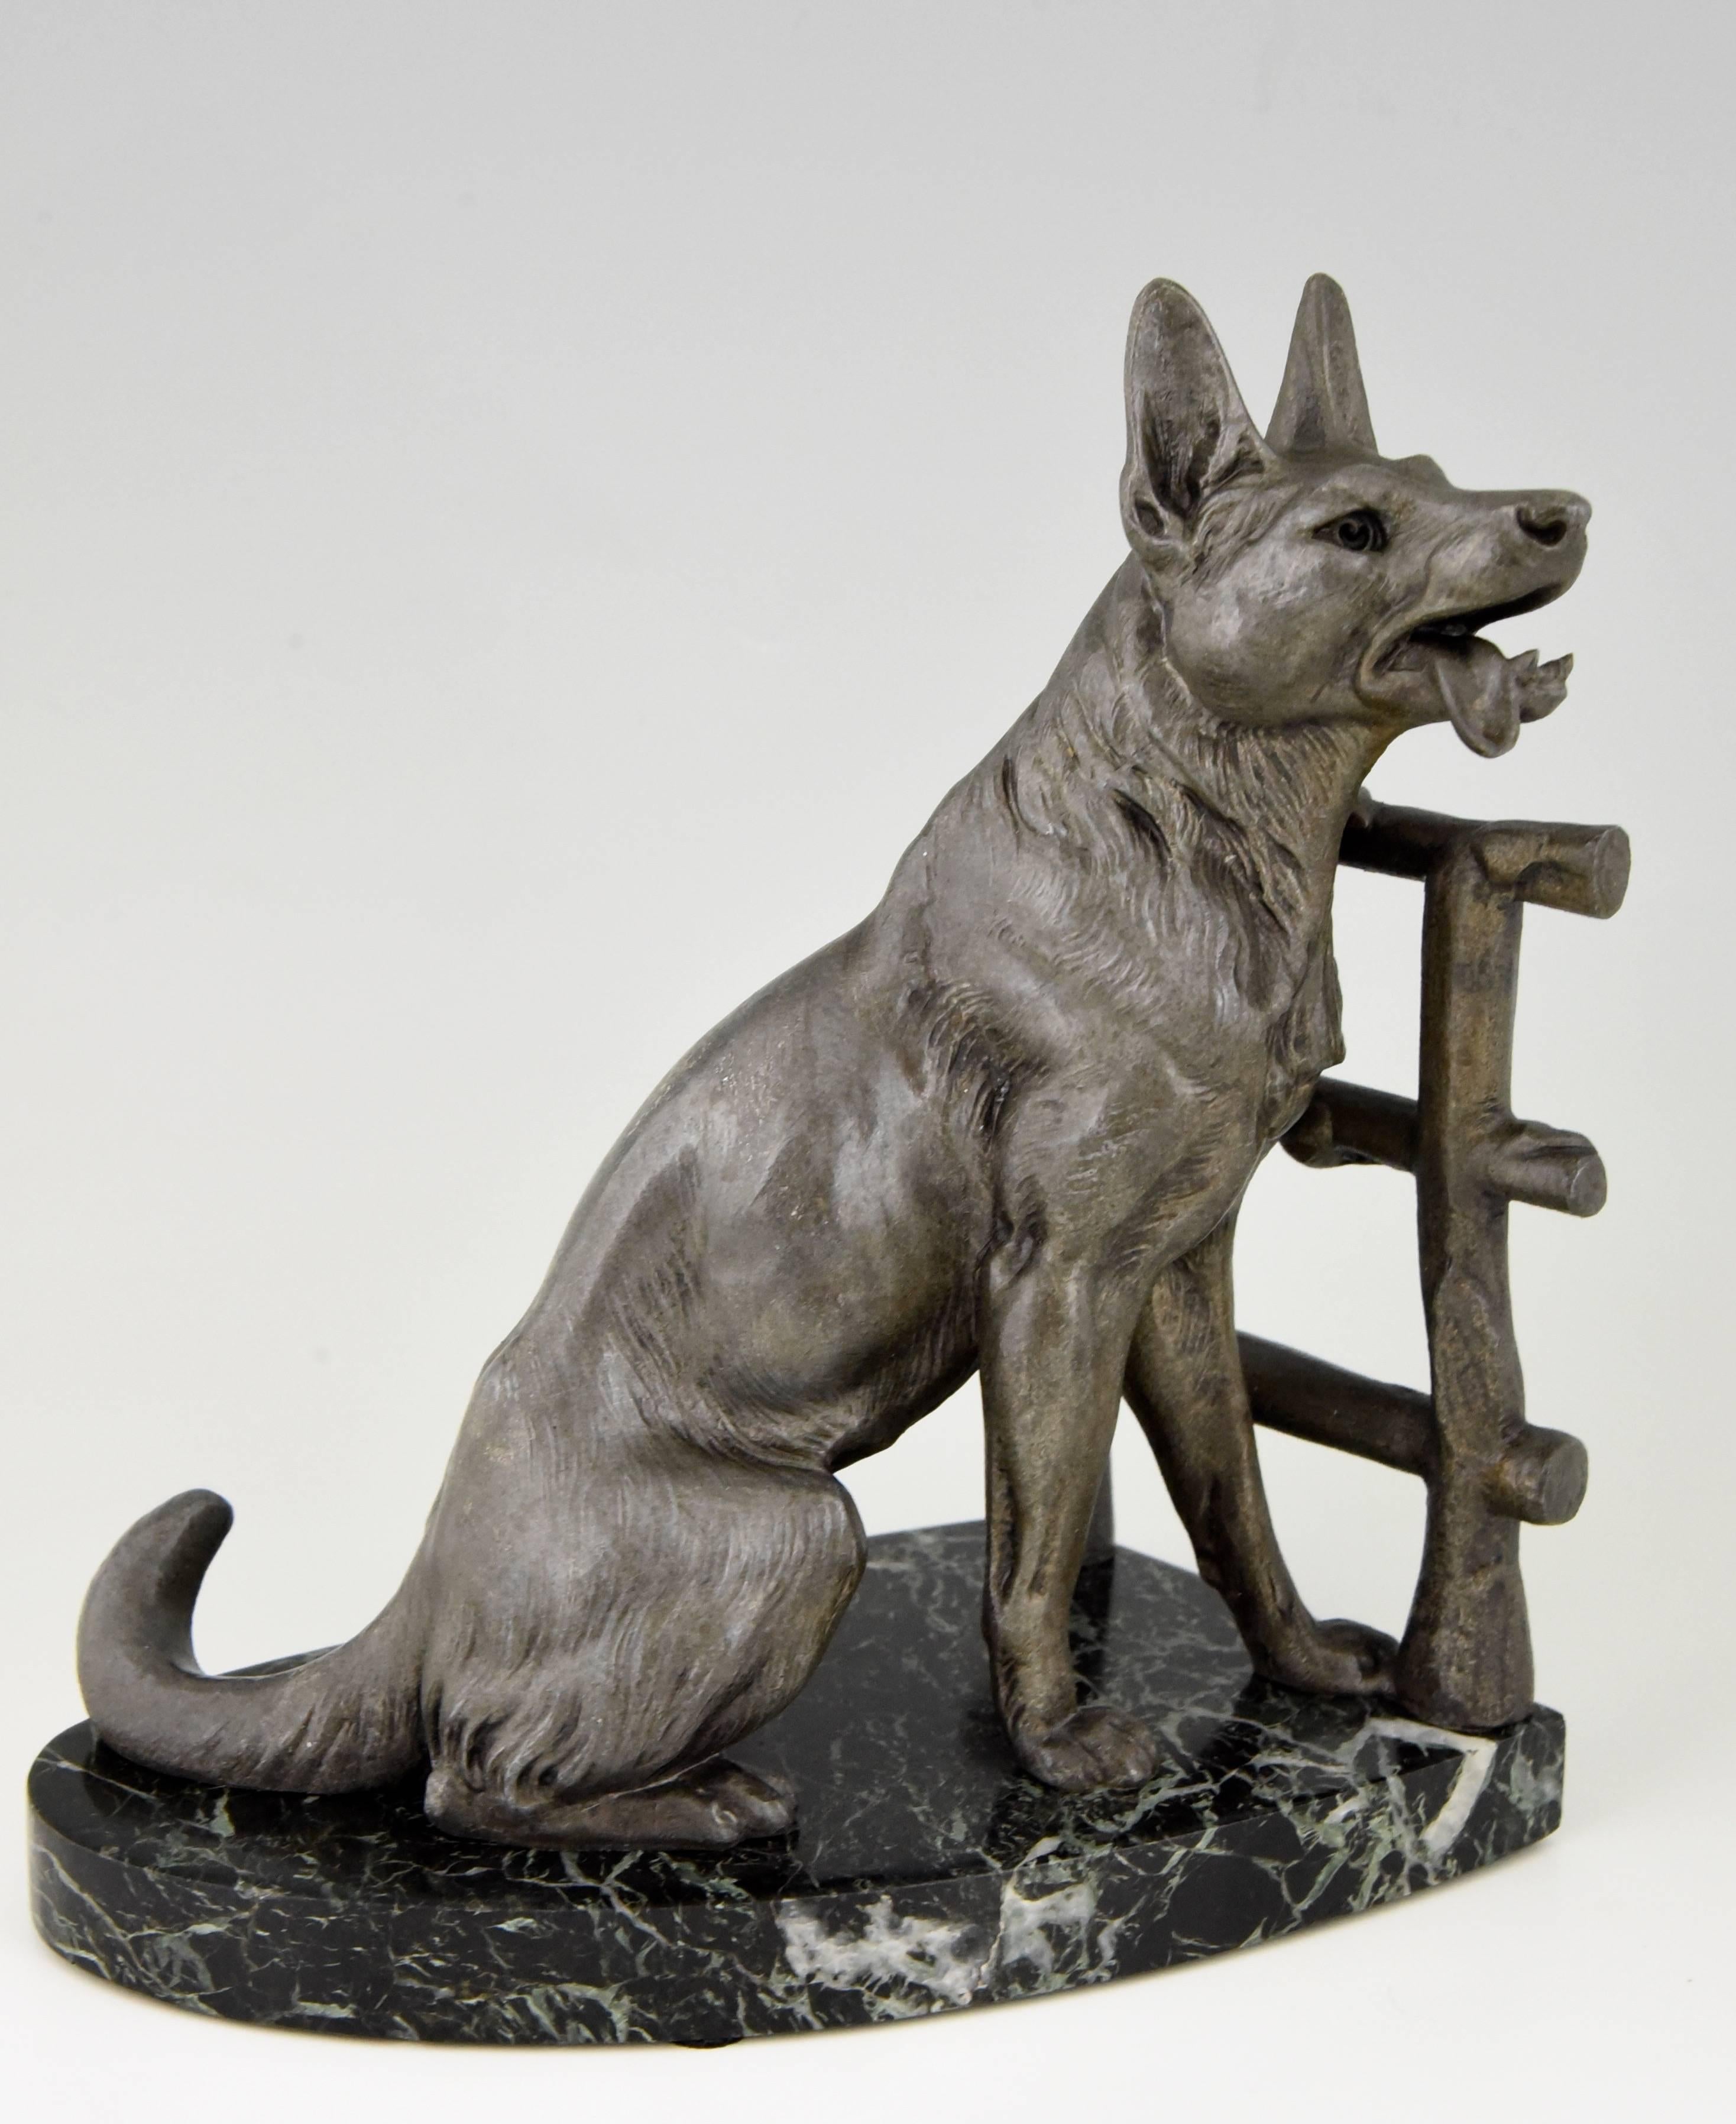 20th Century Art Deco German Shepherd Dog Bookends by Carvin, 1930 France